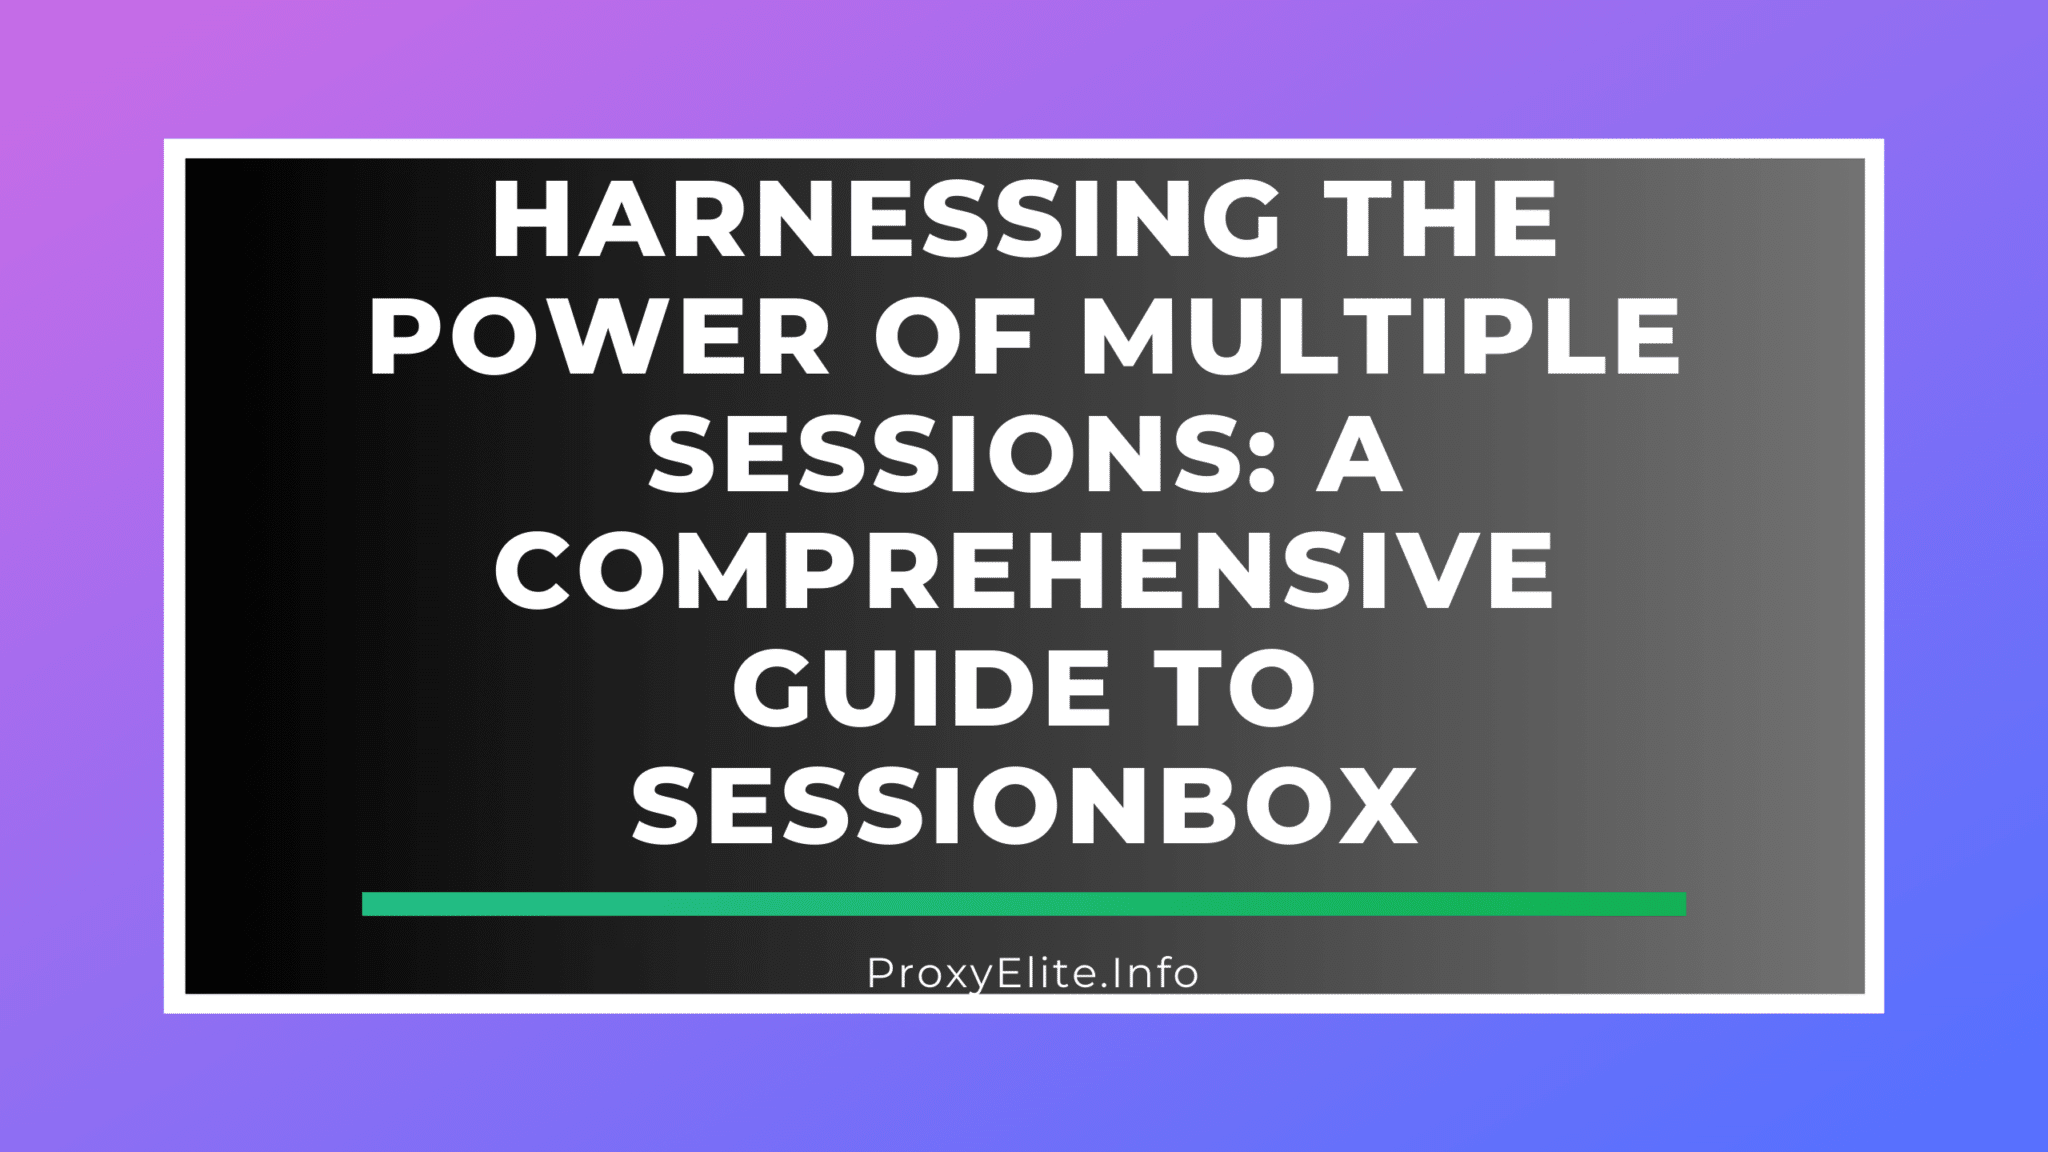 Harnessing the Power of Multiple Sessions: A Comprehensive Guide to SessionBox